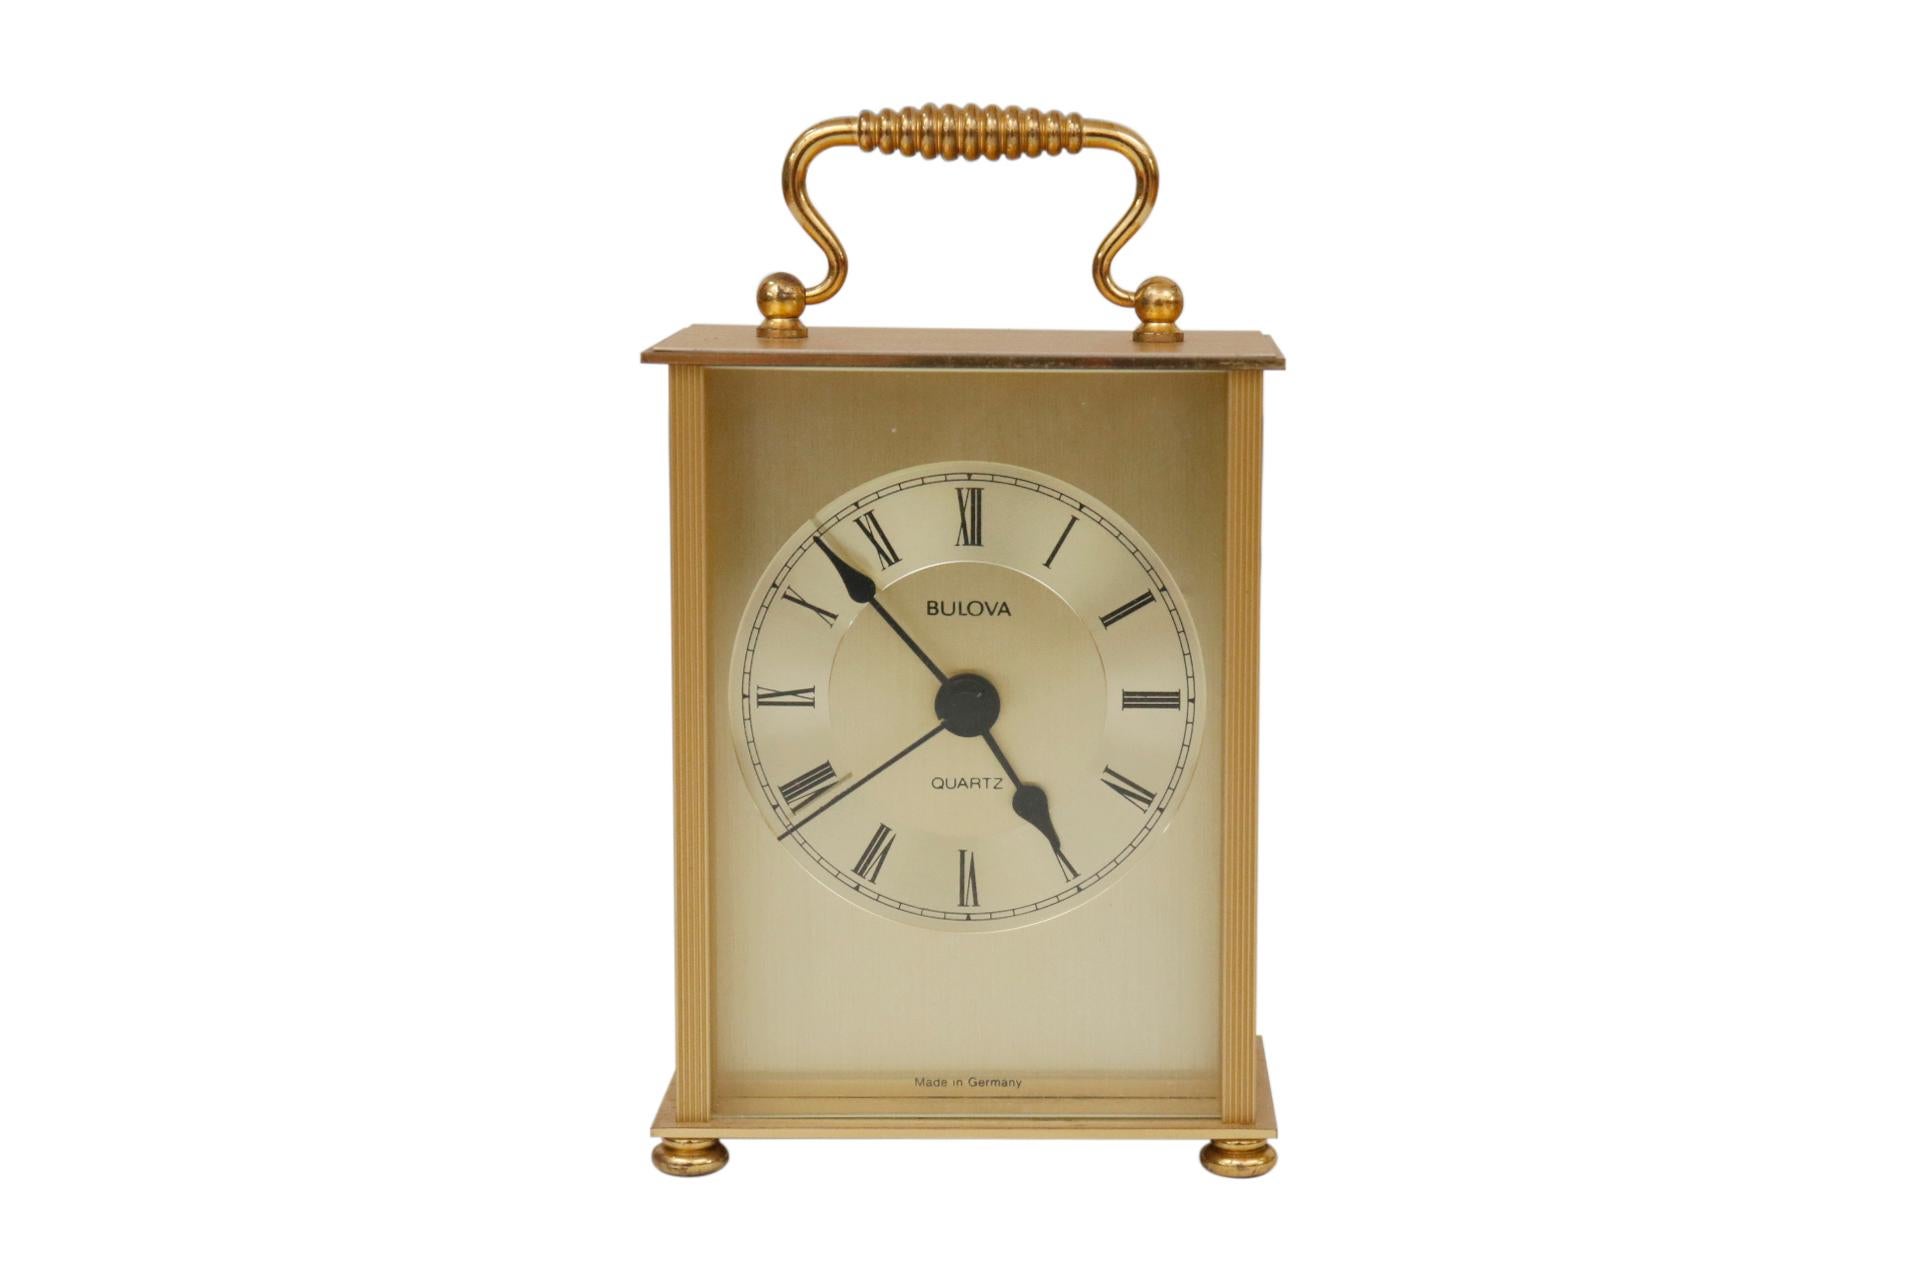 A traditional carriage clock made by Bulova. A simple clock face with Roman Numerals behind glass is set in a simple gold box topped with a bail handle. Engraved with three stripes down each side and finished with small bun feet.